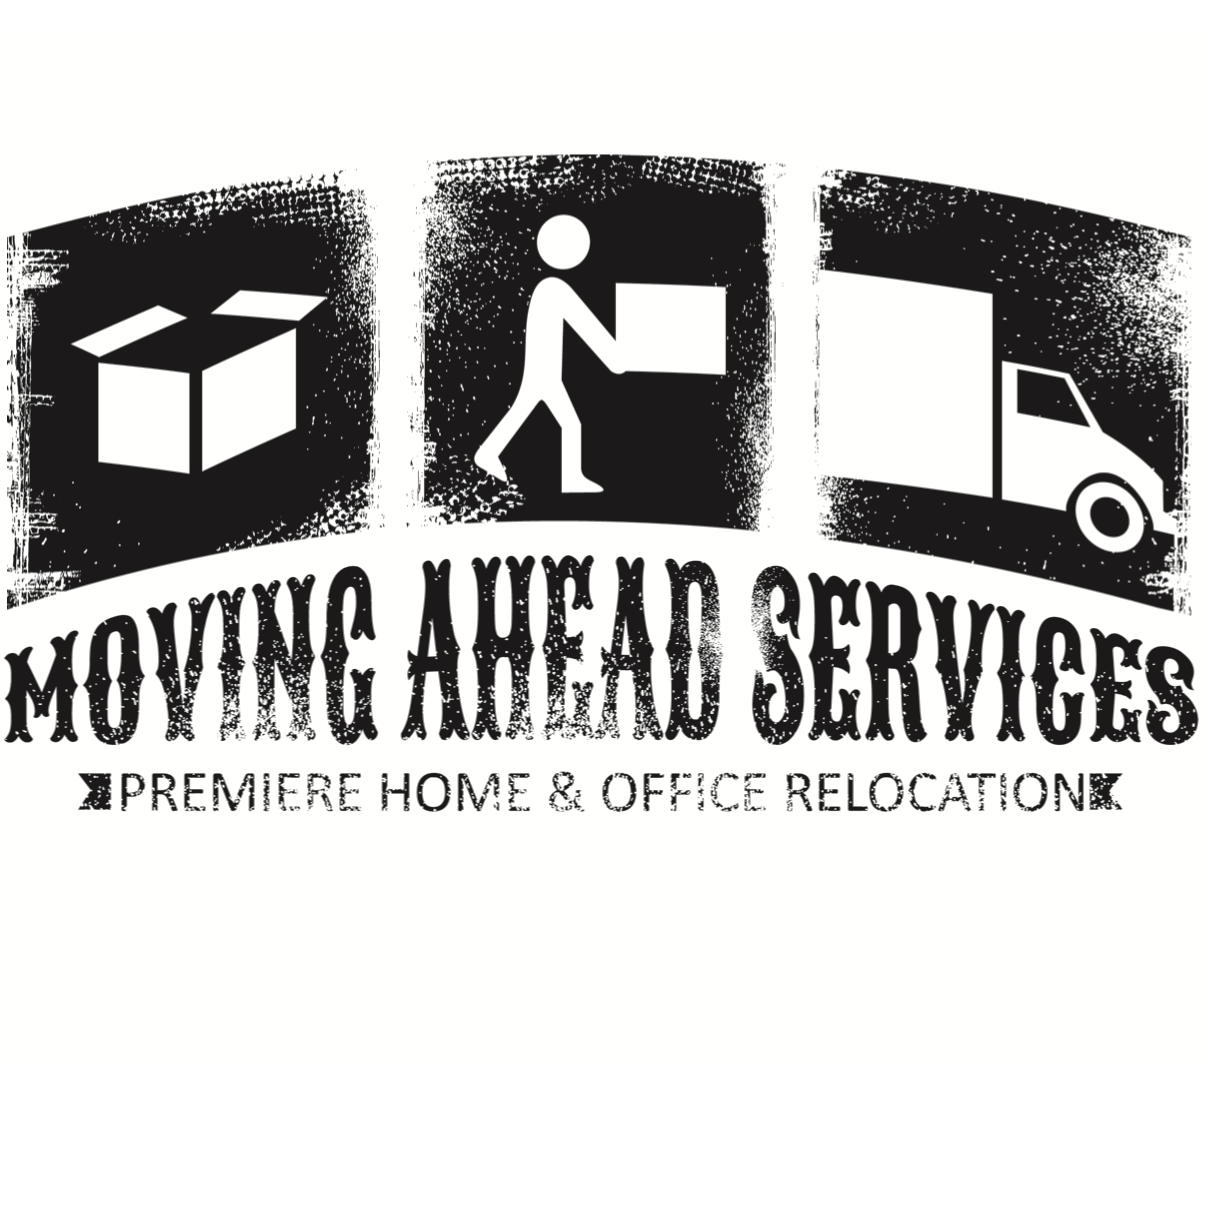 Moving Ahead Services Photo